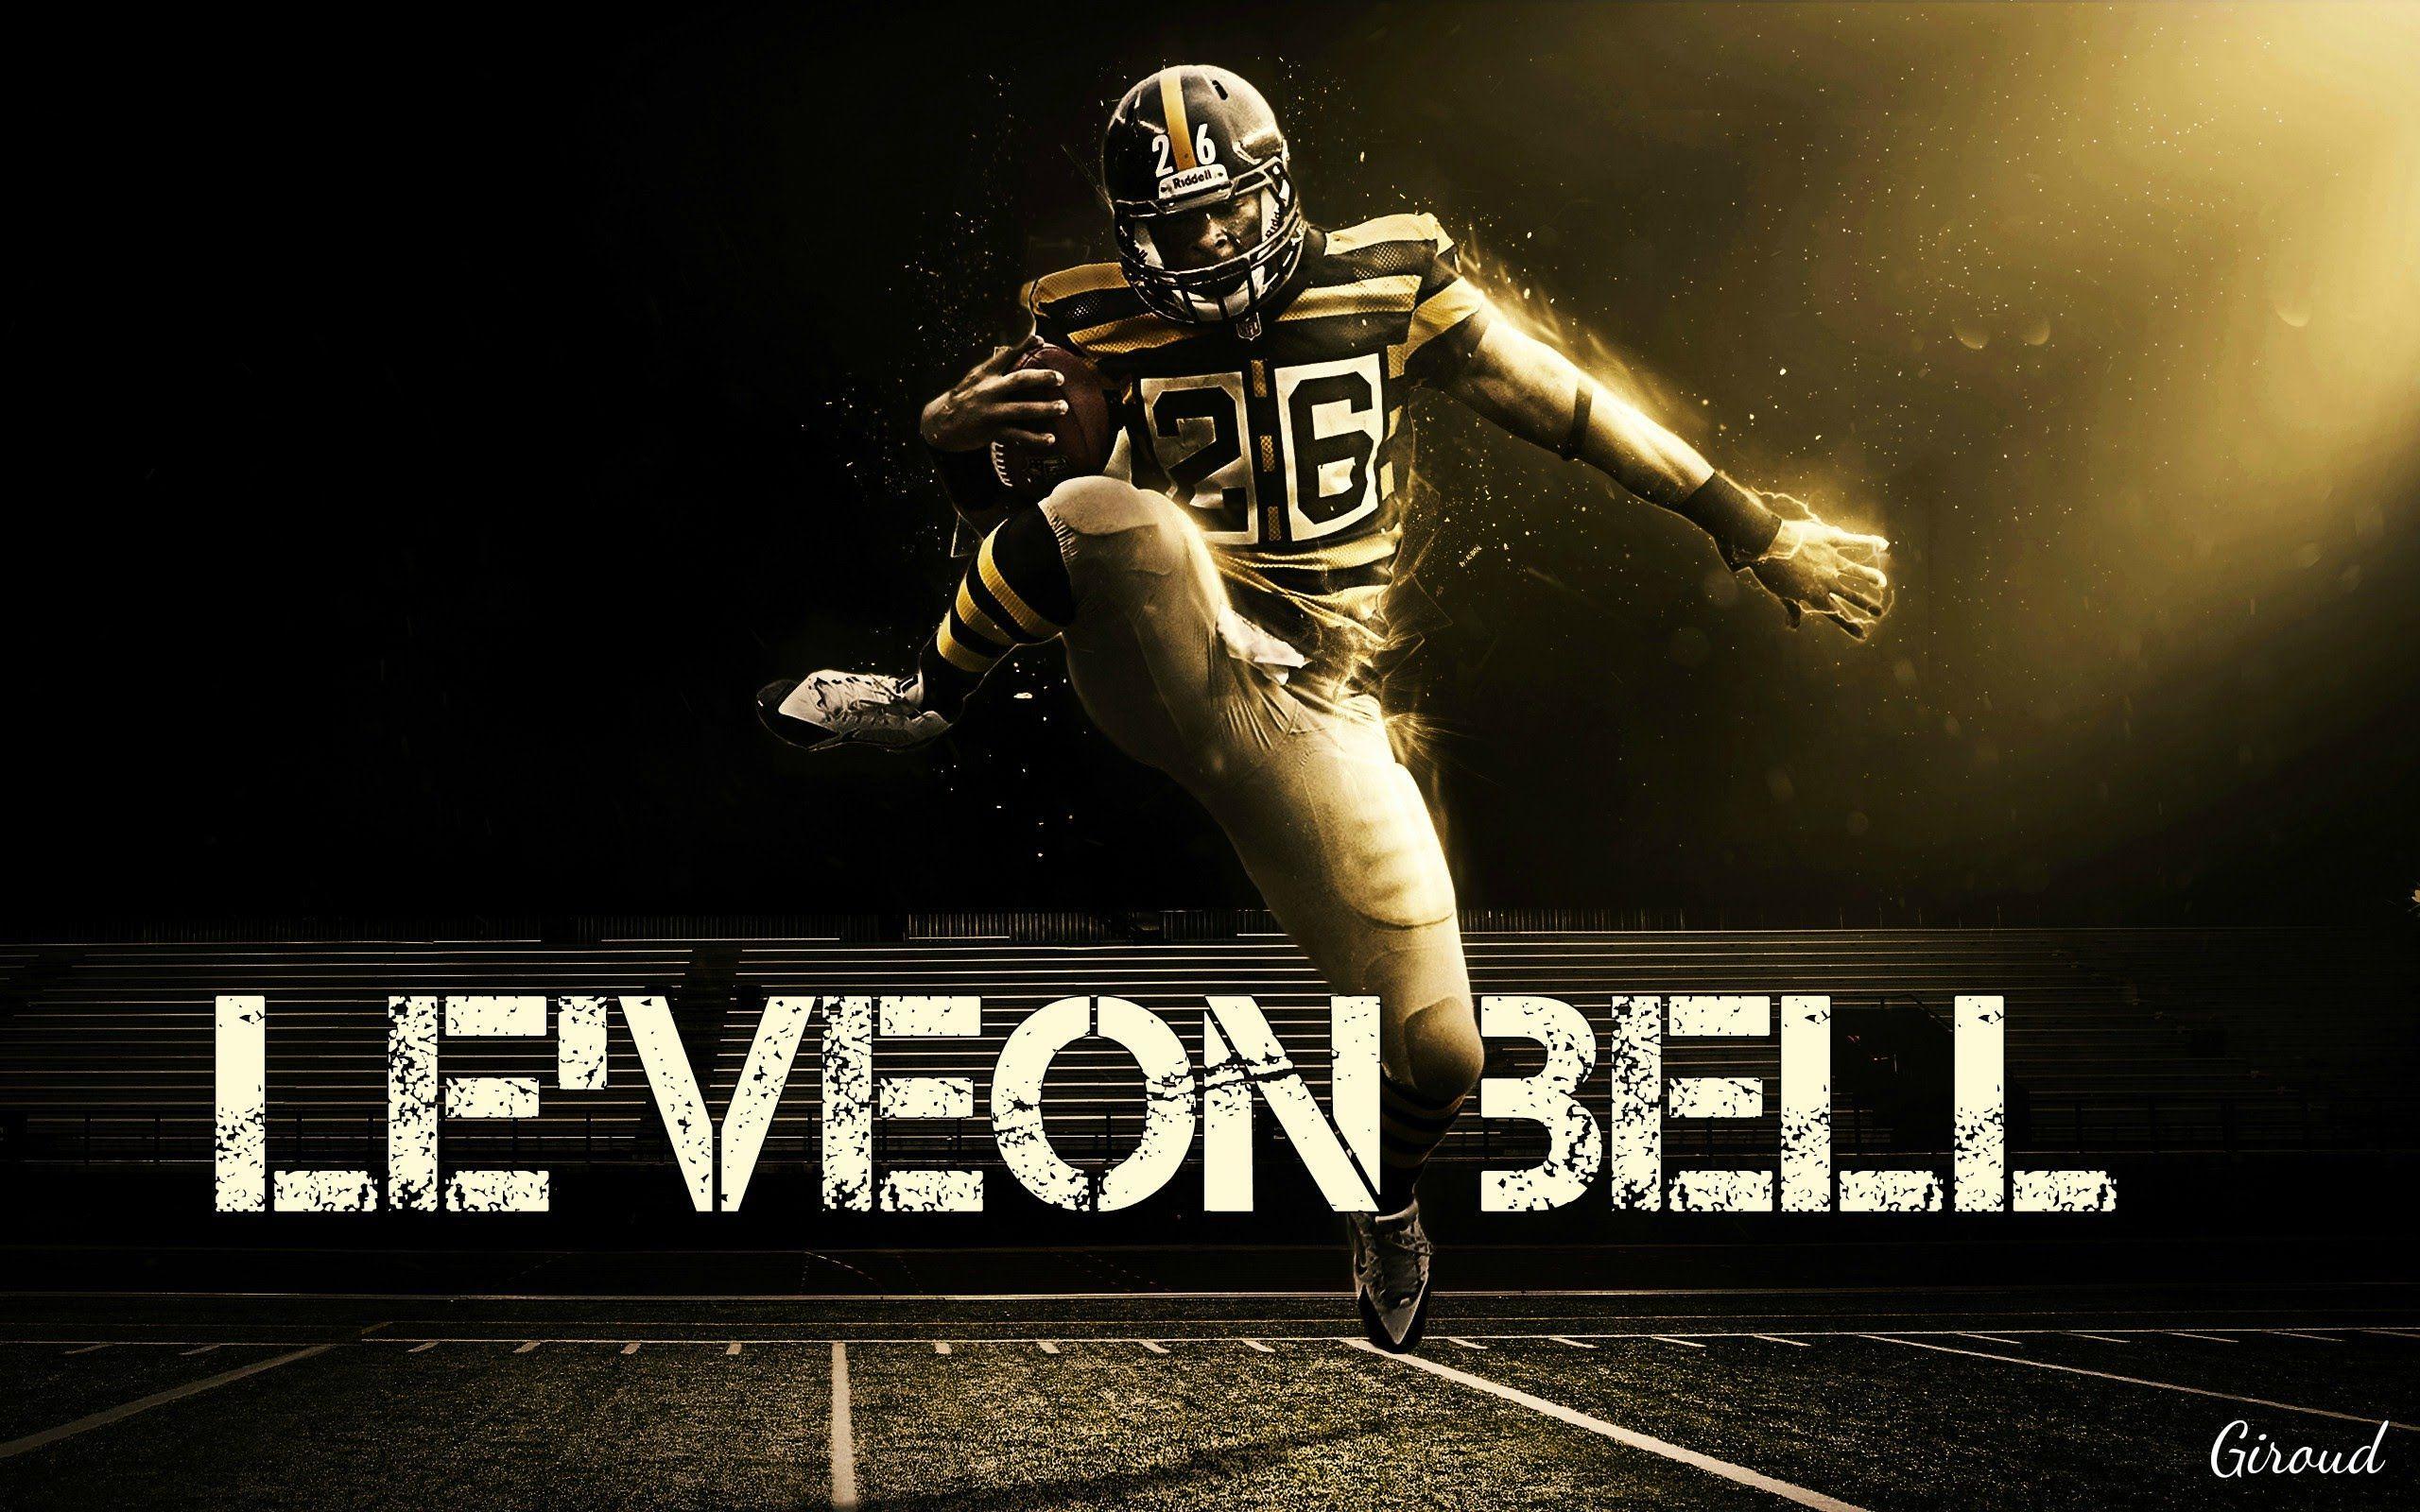 Le'Veon Bell ''Antidote ''. ᴴᴰ